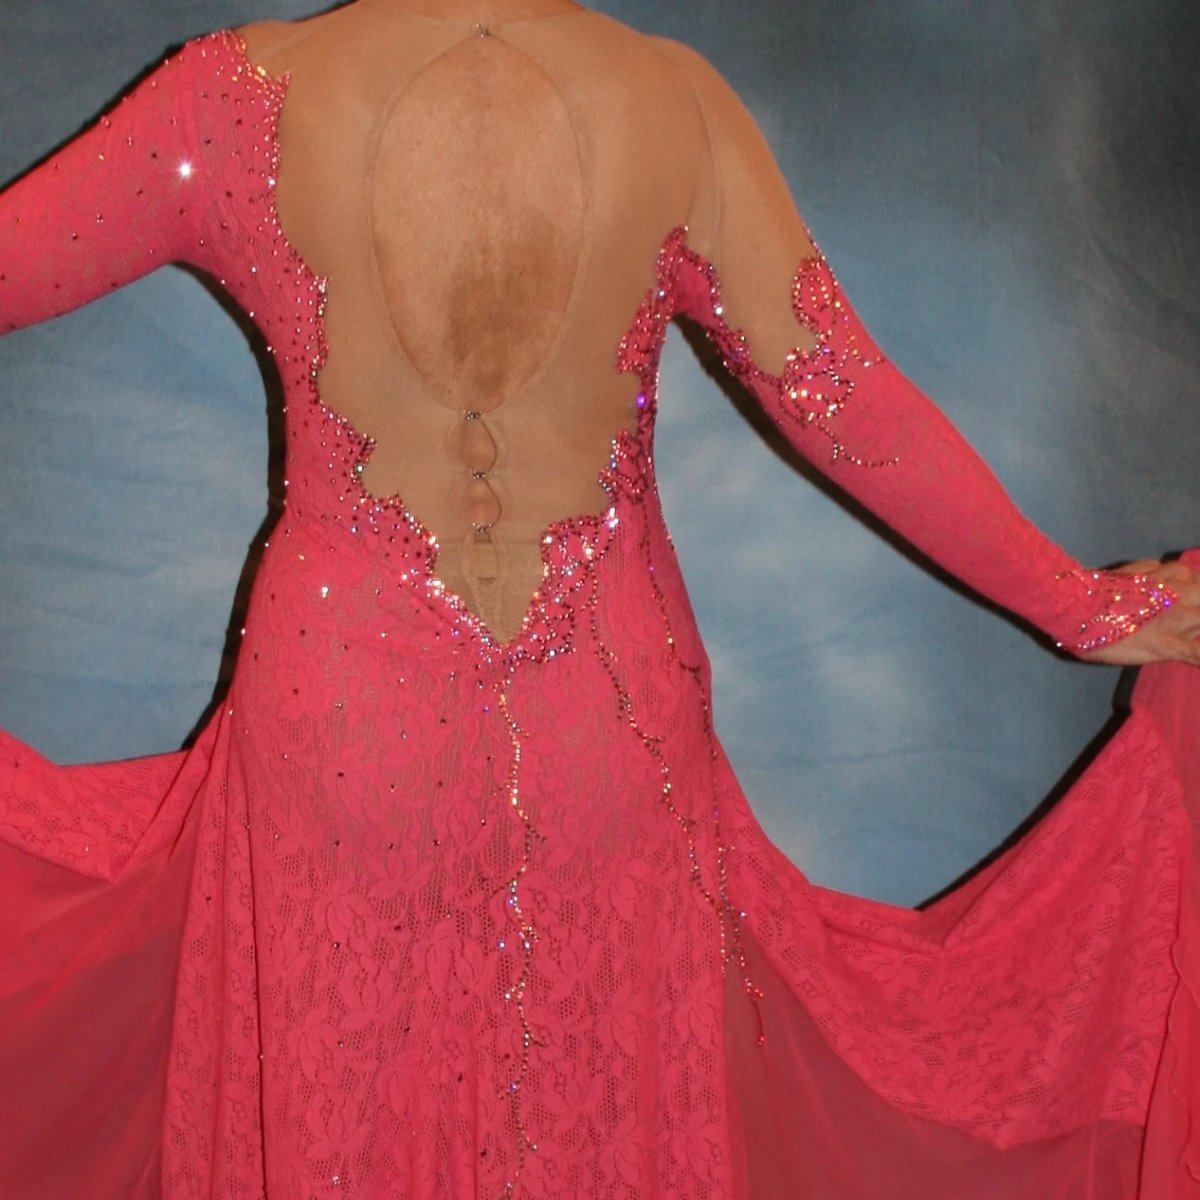 Crystal's Creations back close up view of Gorgeous salmon pink ballroom dance dress was created from salmon pink stretch lace on nude illusion base with yards & yards of salmon pink chiffon insets & flounces …